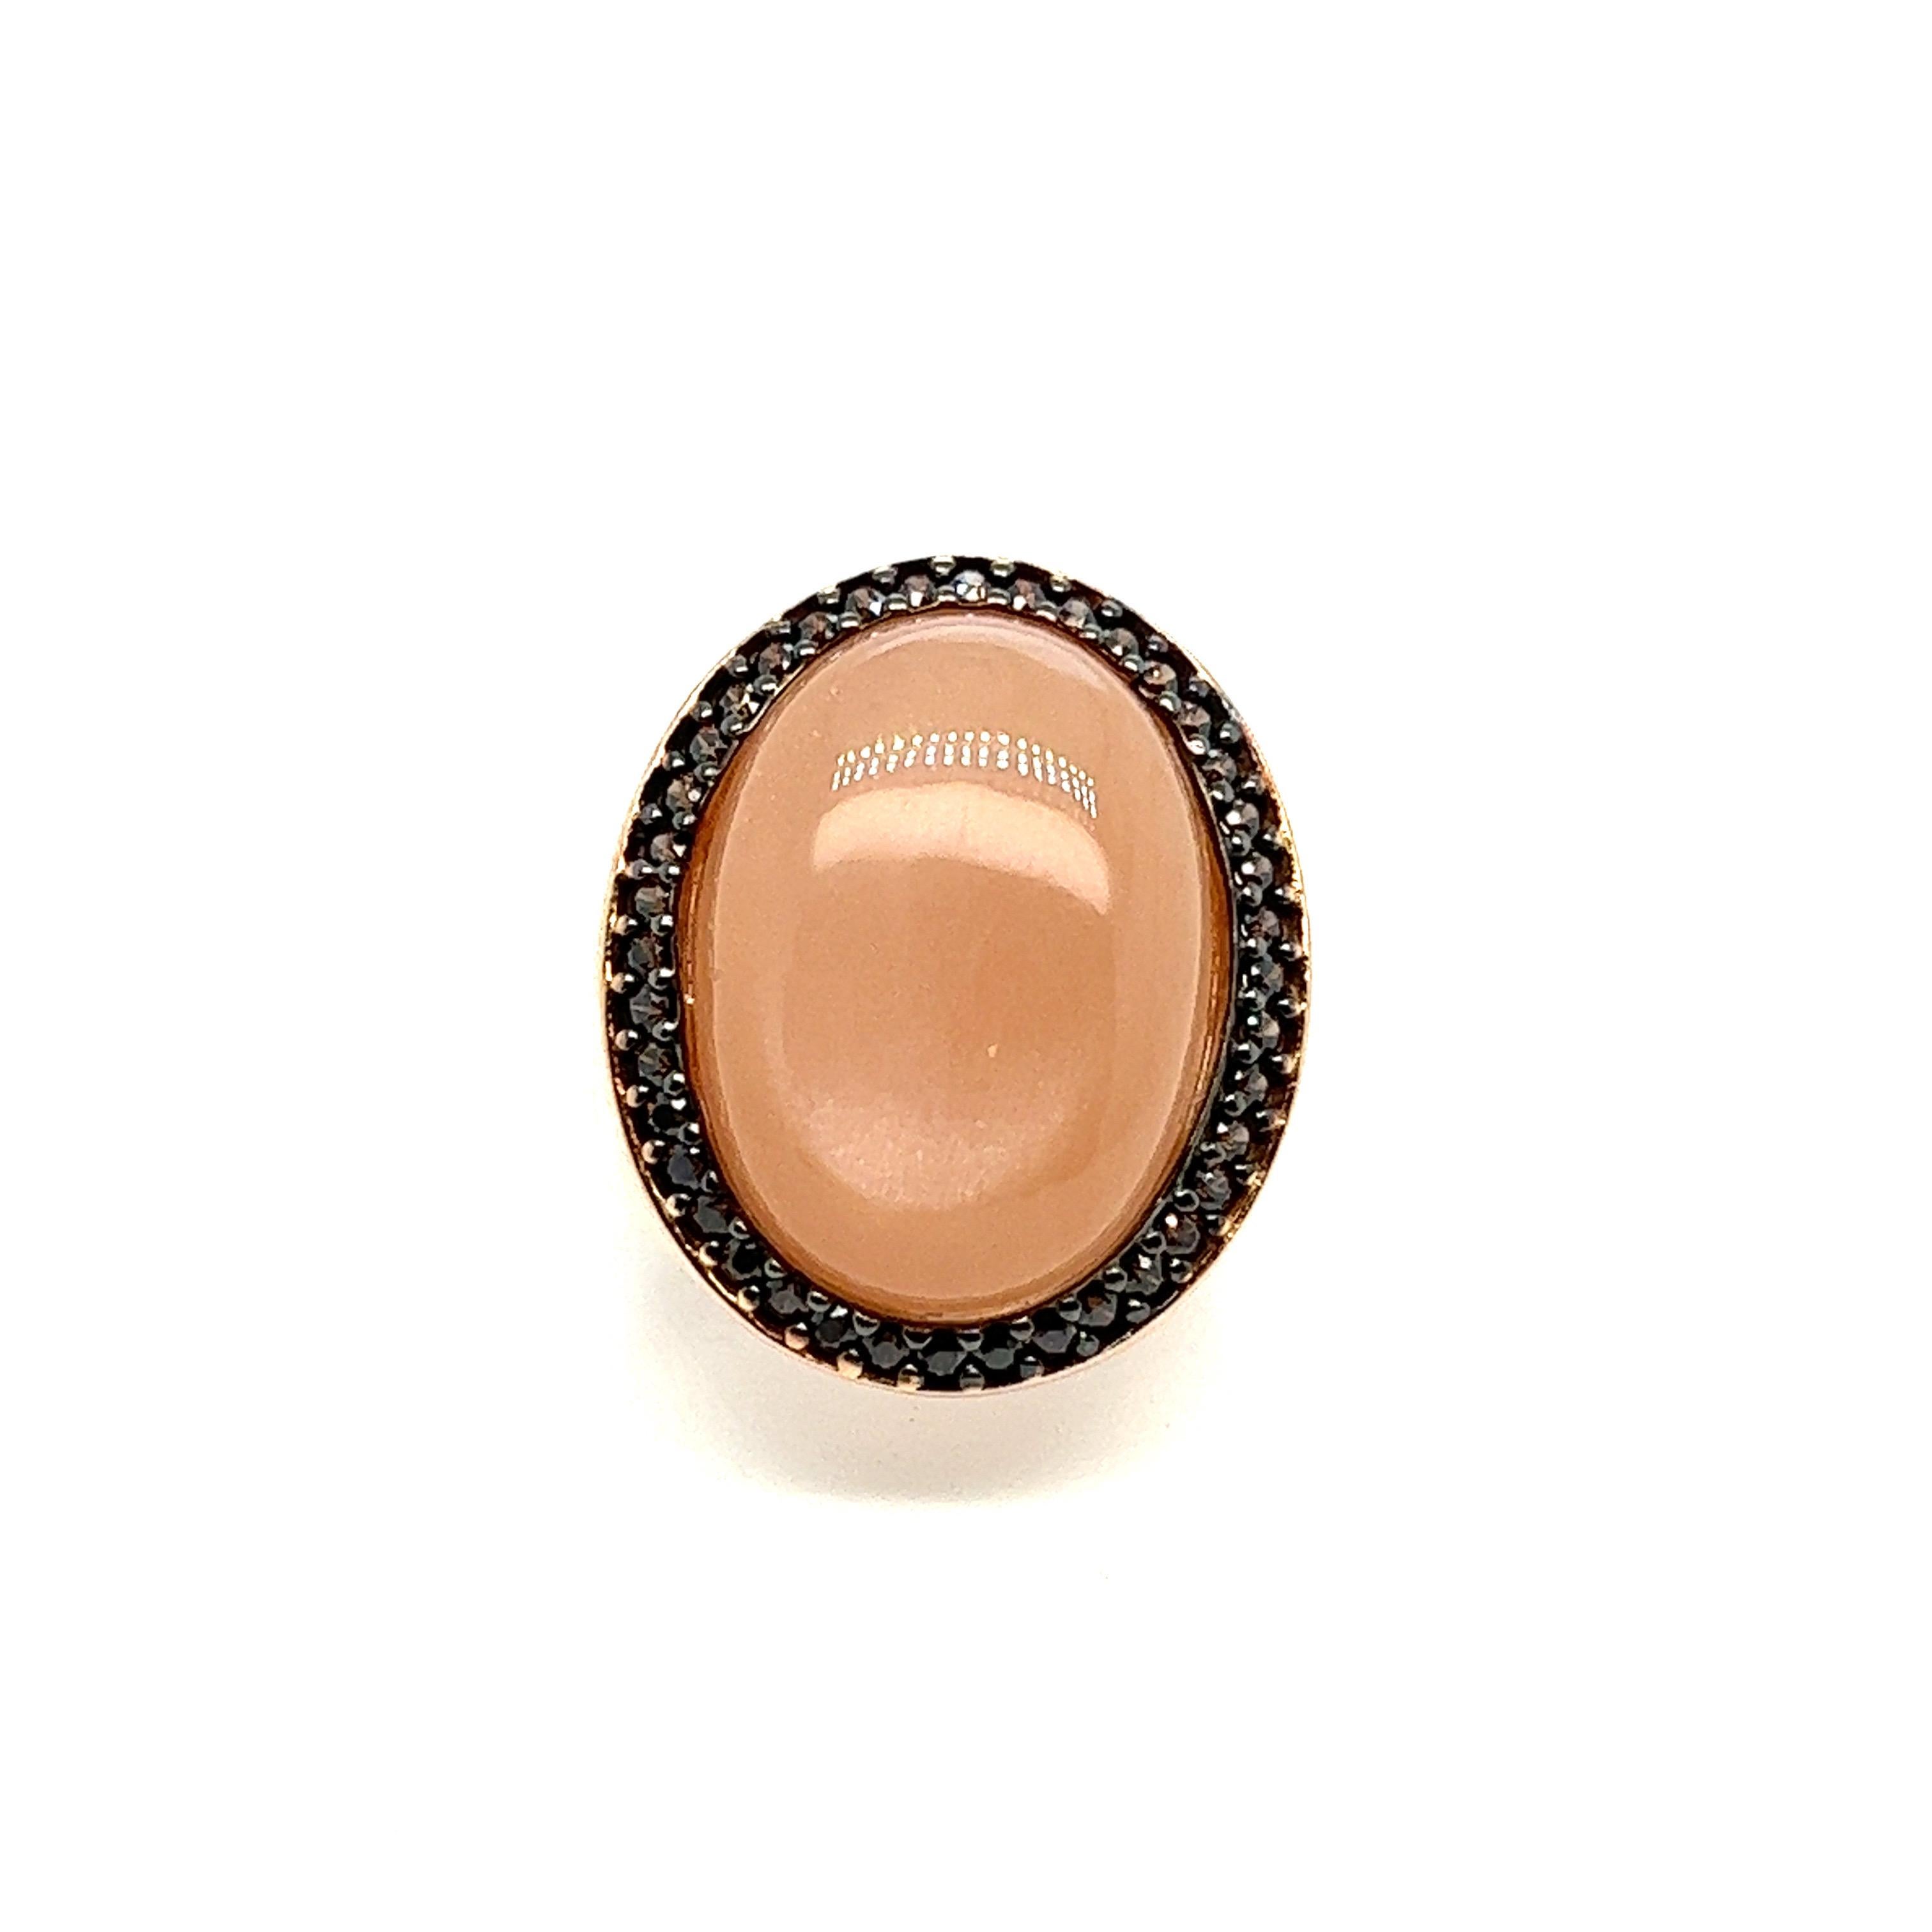 Discover our magnificent 18-carat pink gold cocktail ring, topped with a dazzling peach moostone. This exceptional piece embodies elegance and refinement, with its unique design and impeccable quality. The captivating peach moostone cabochon is set